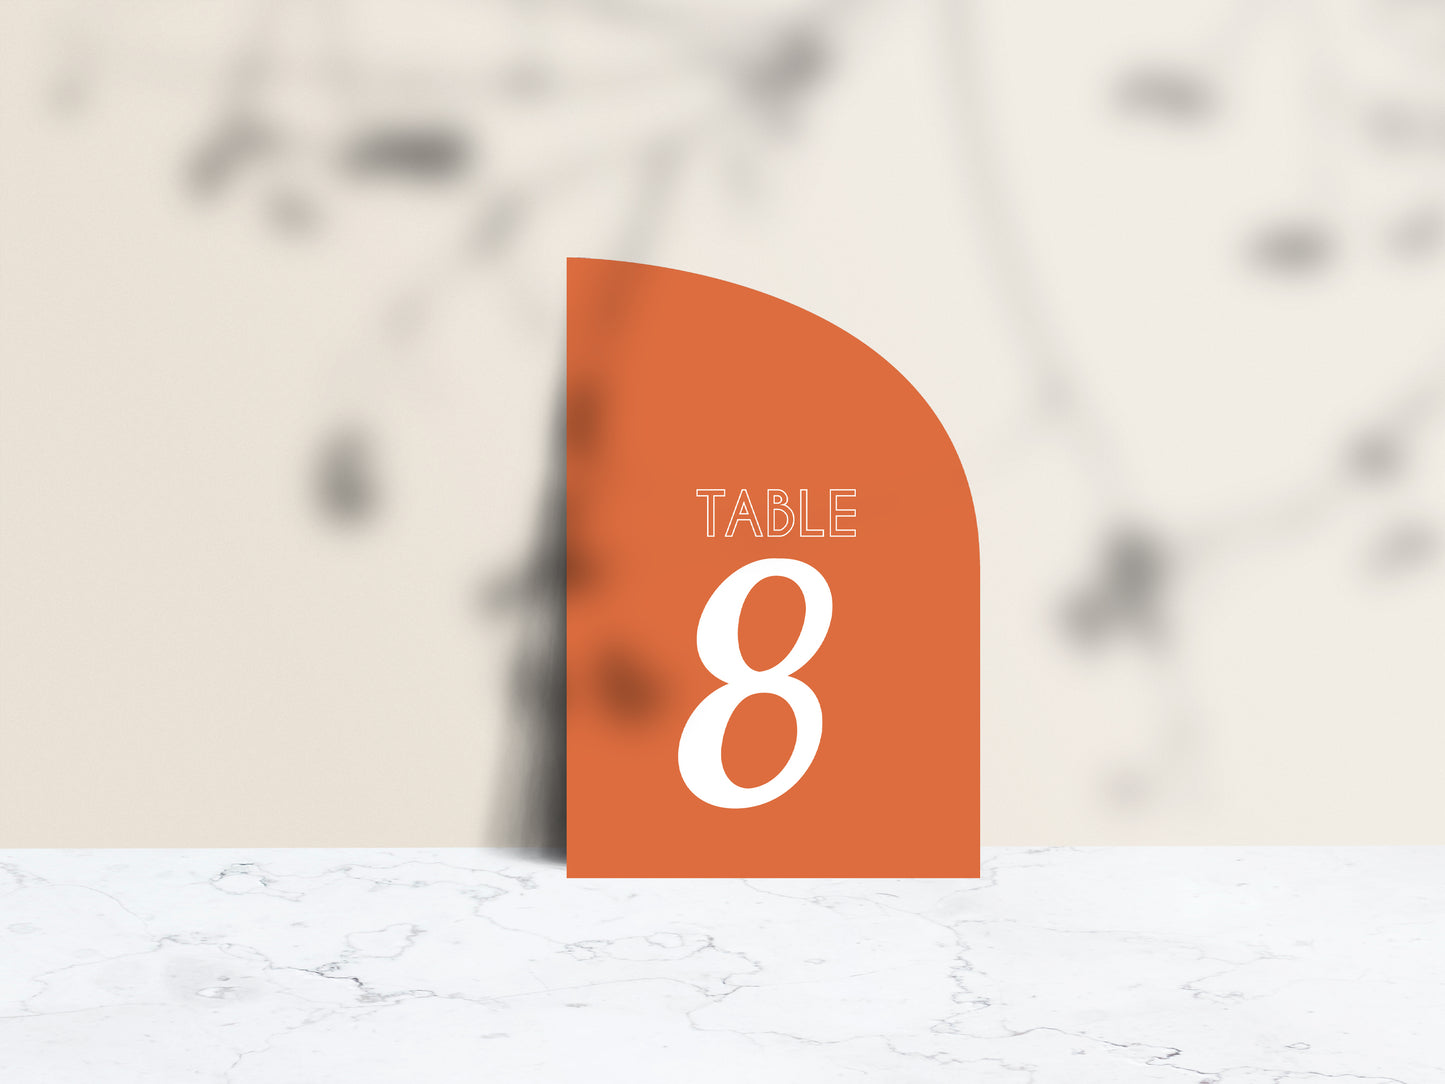 Soul Mate Table Numbers